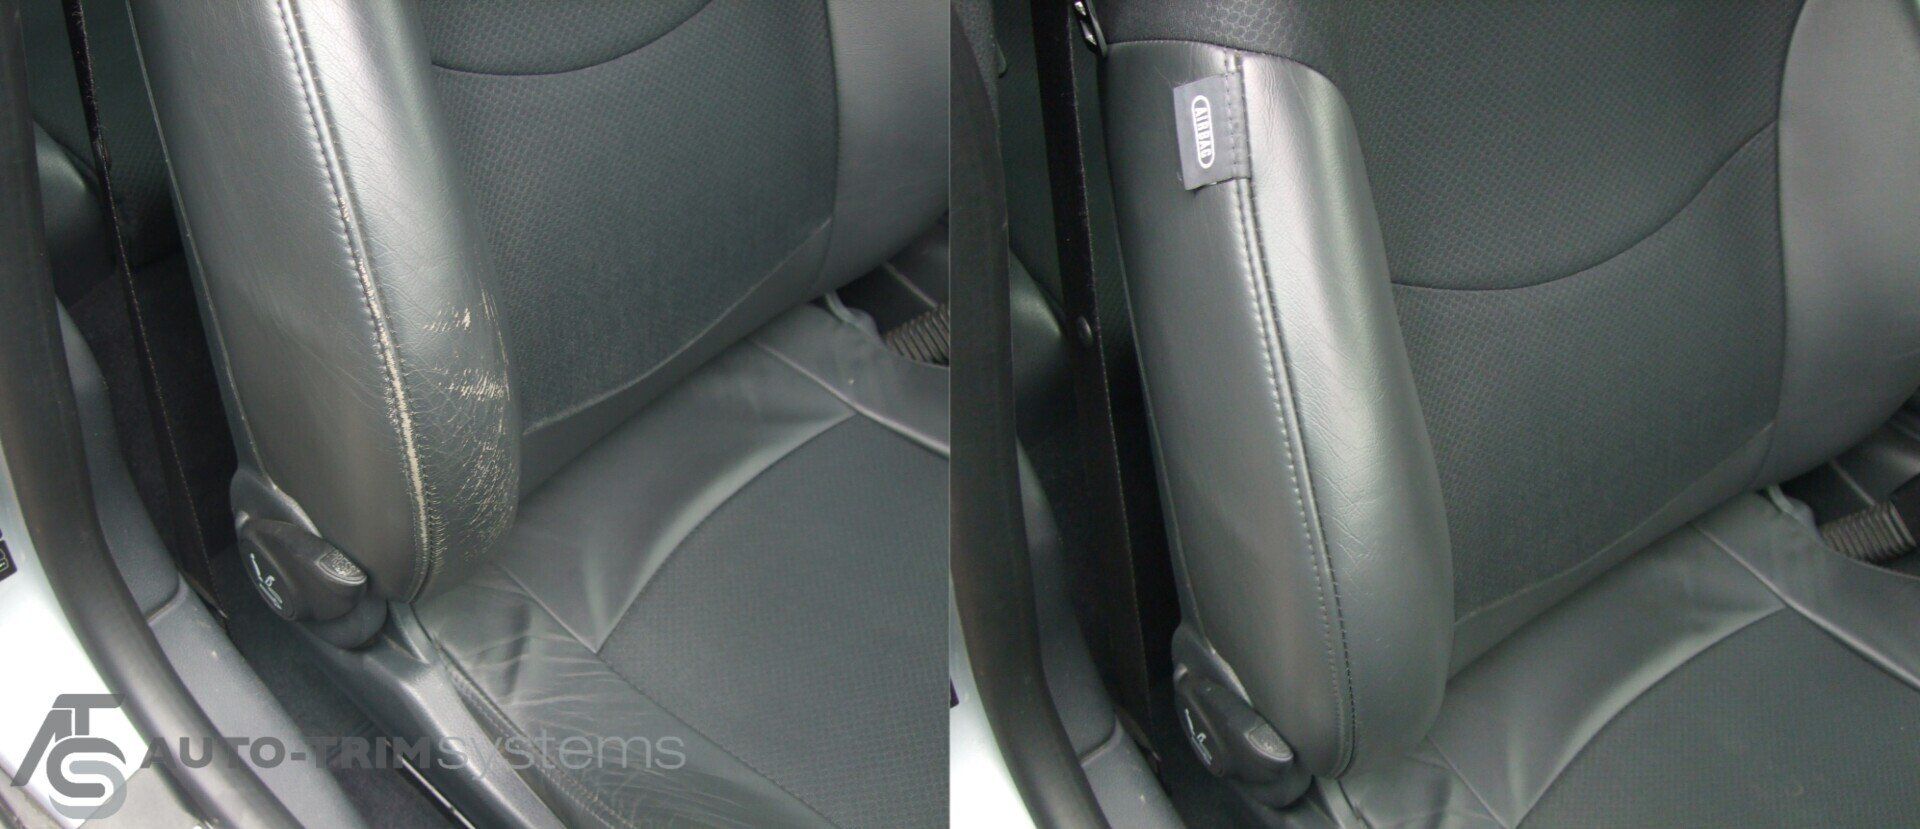 Repair and recolouring made to damaged leather seat panel